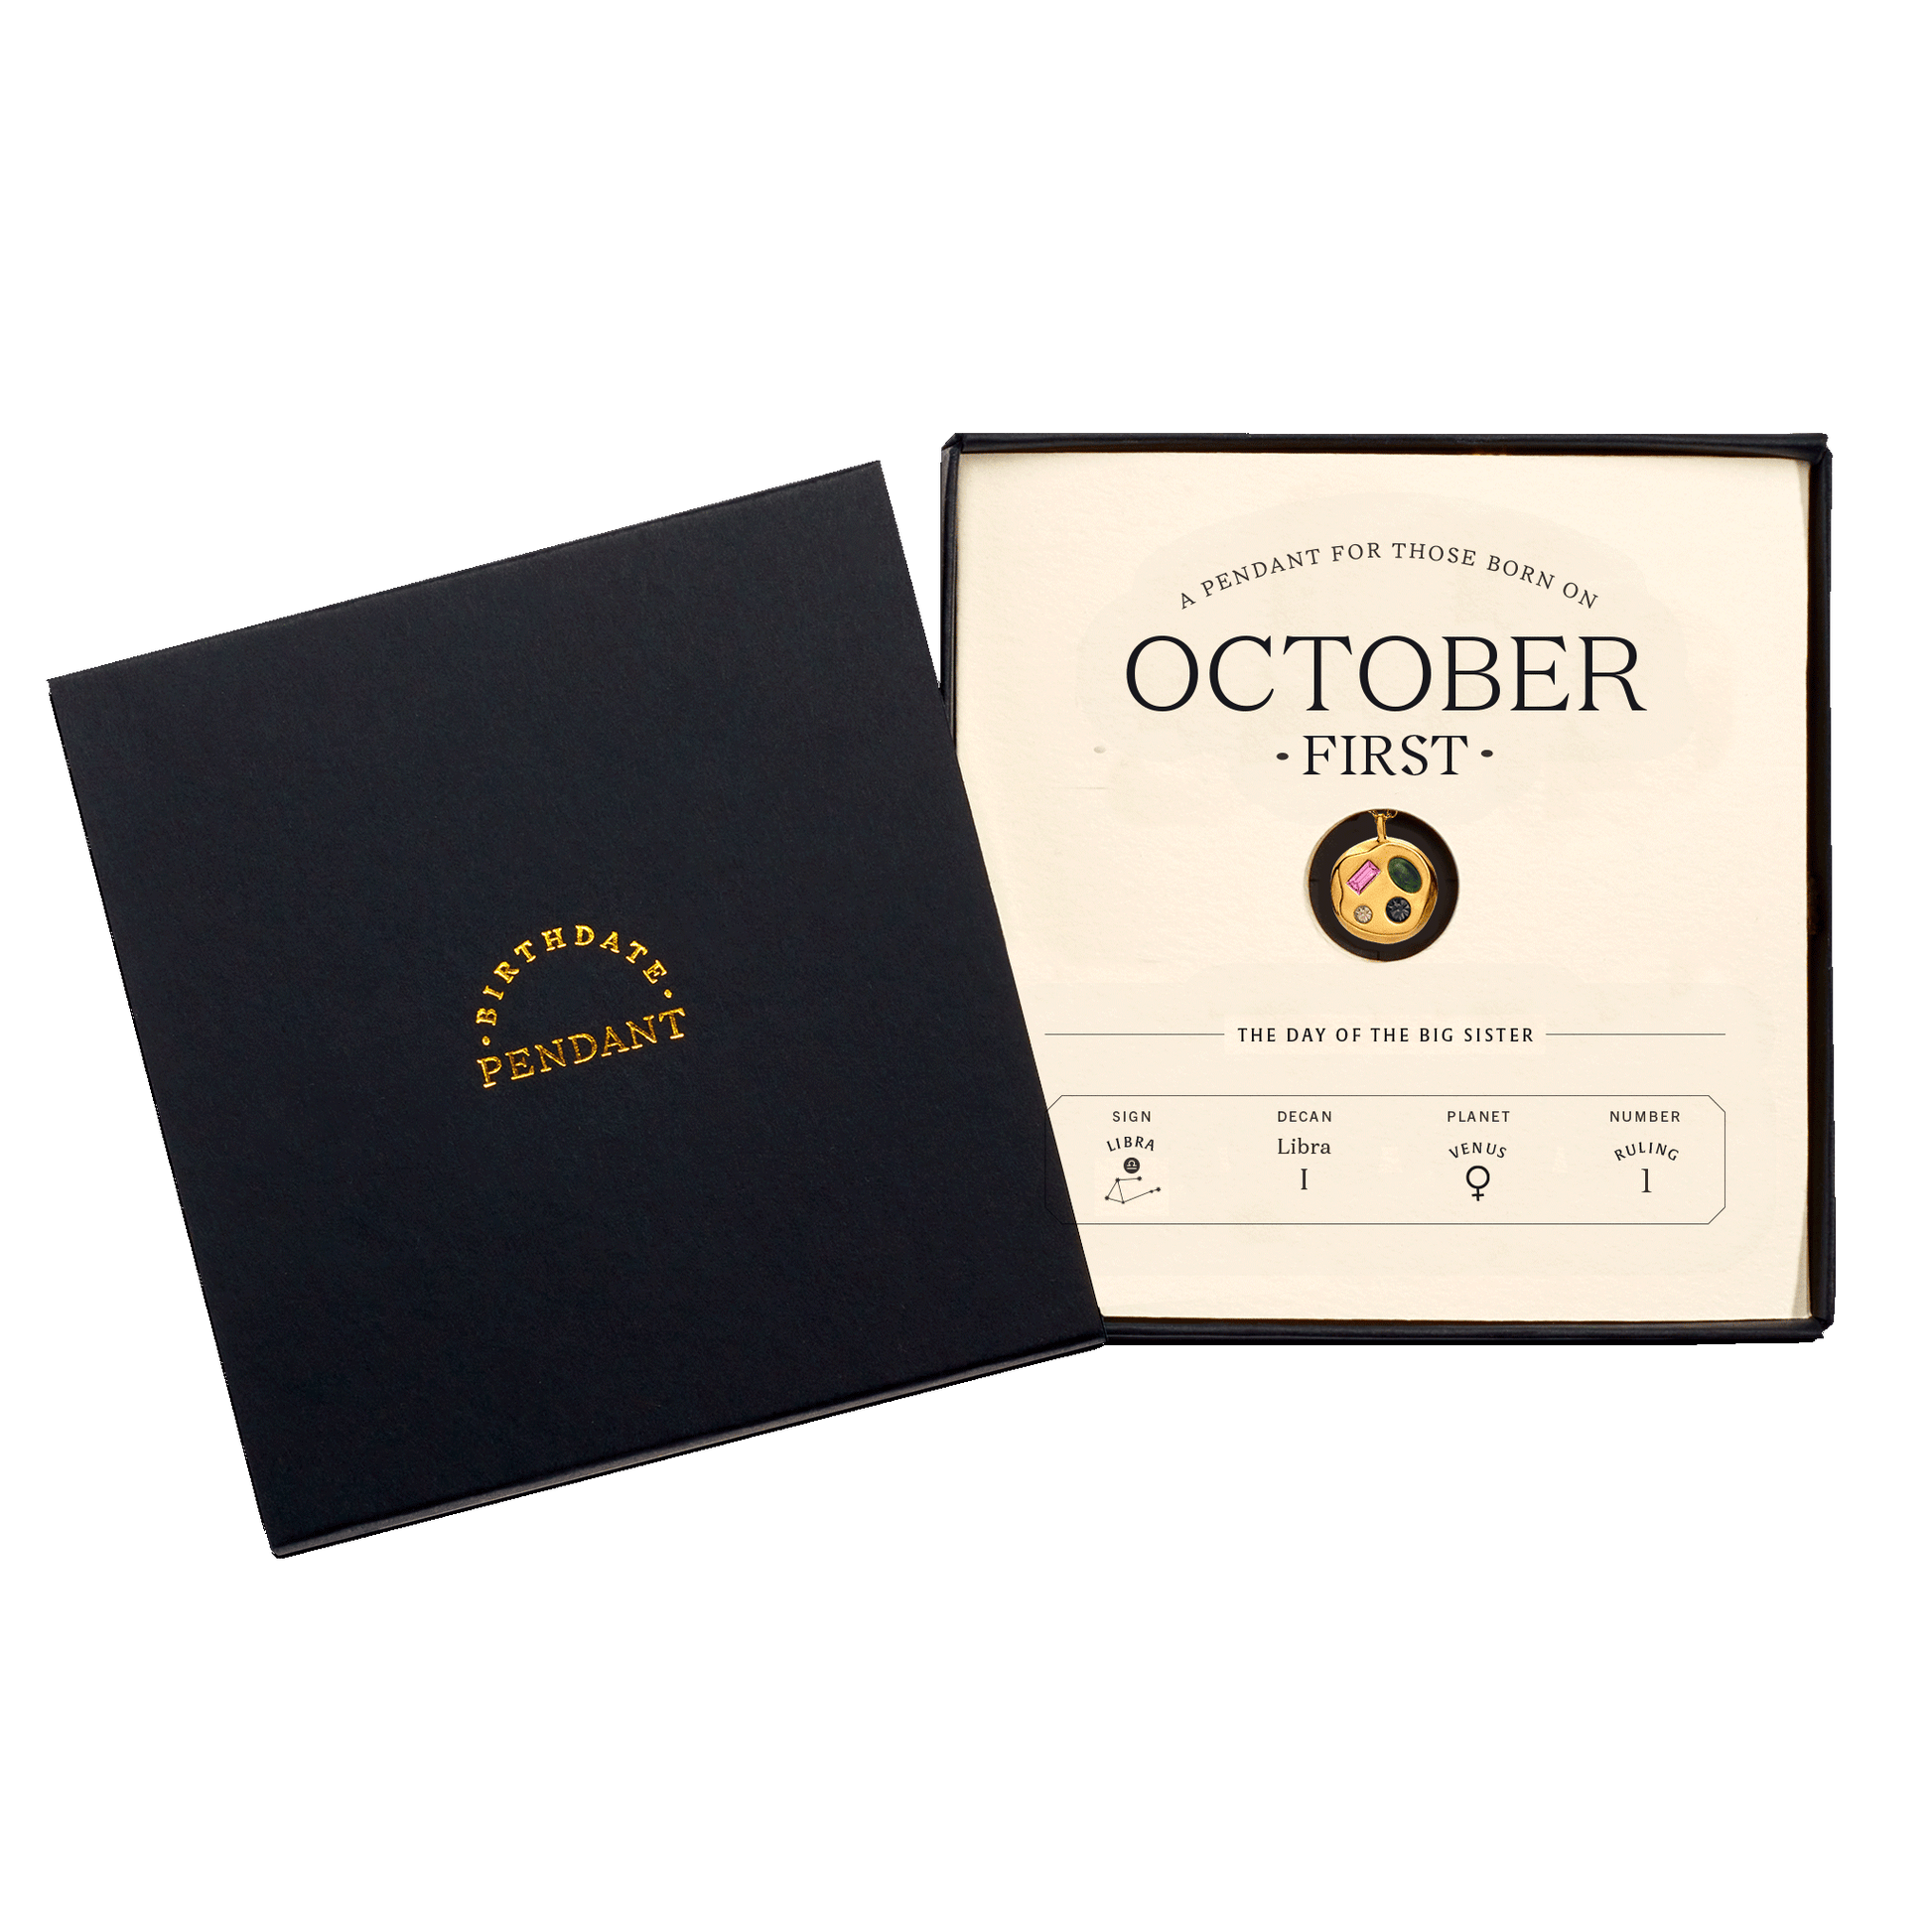 The October First Pendant inside its box